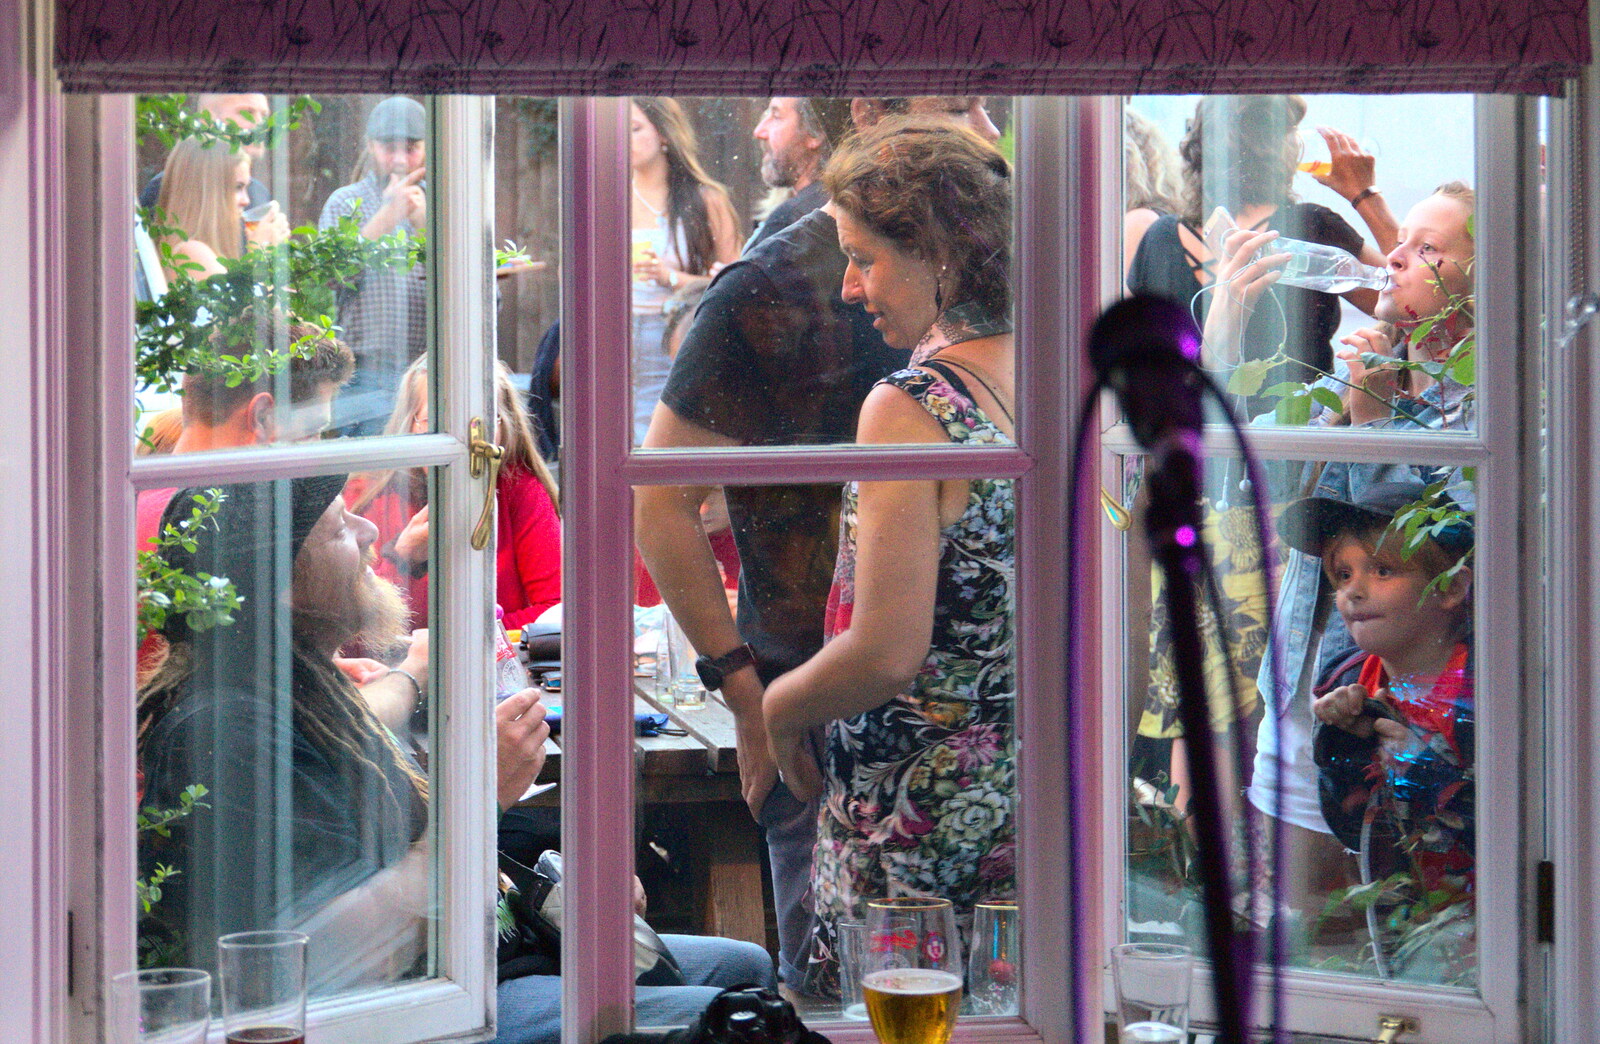 The busy view through the window is like a collage from The Whiskey Shivers at The Crown, Burston, Norfolk - 1st August 2018